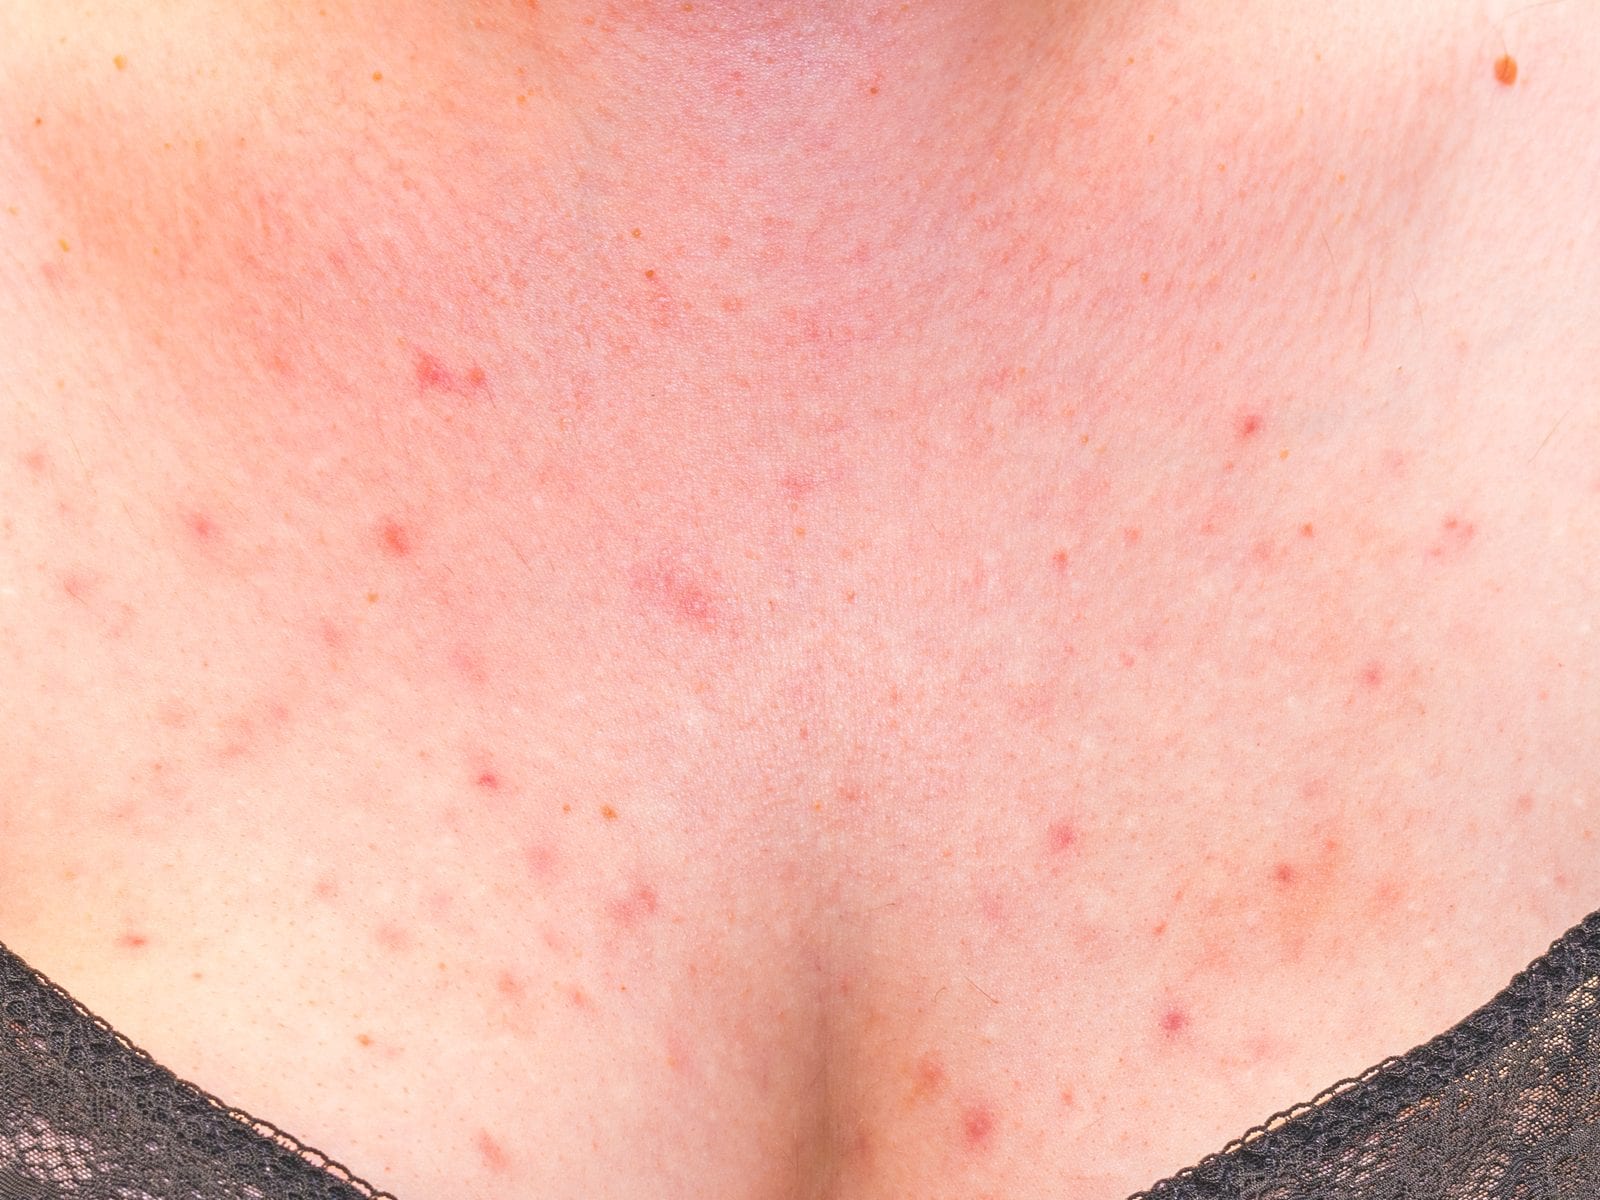 Pimples on Breasts: Causes, Treatment, When to See a Doctor